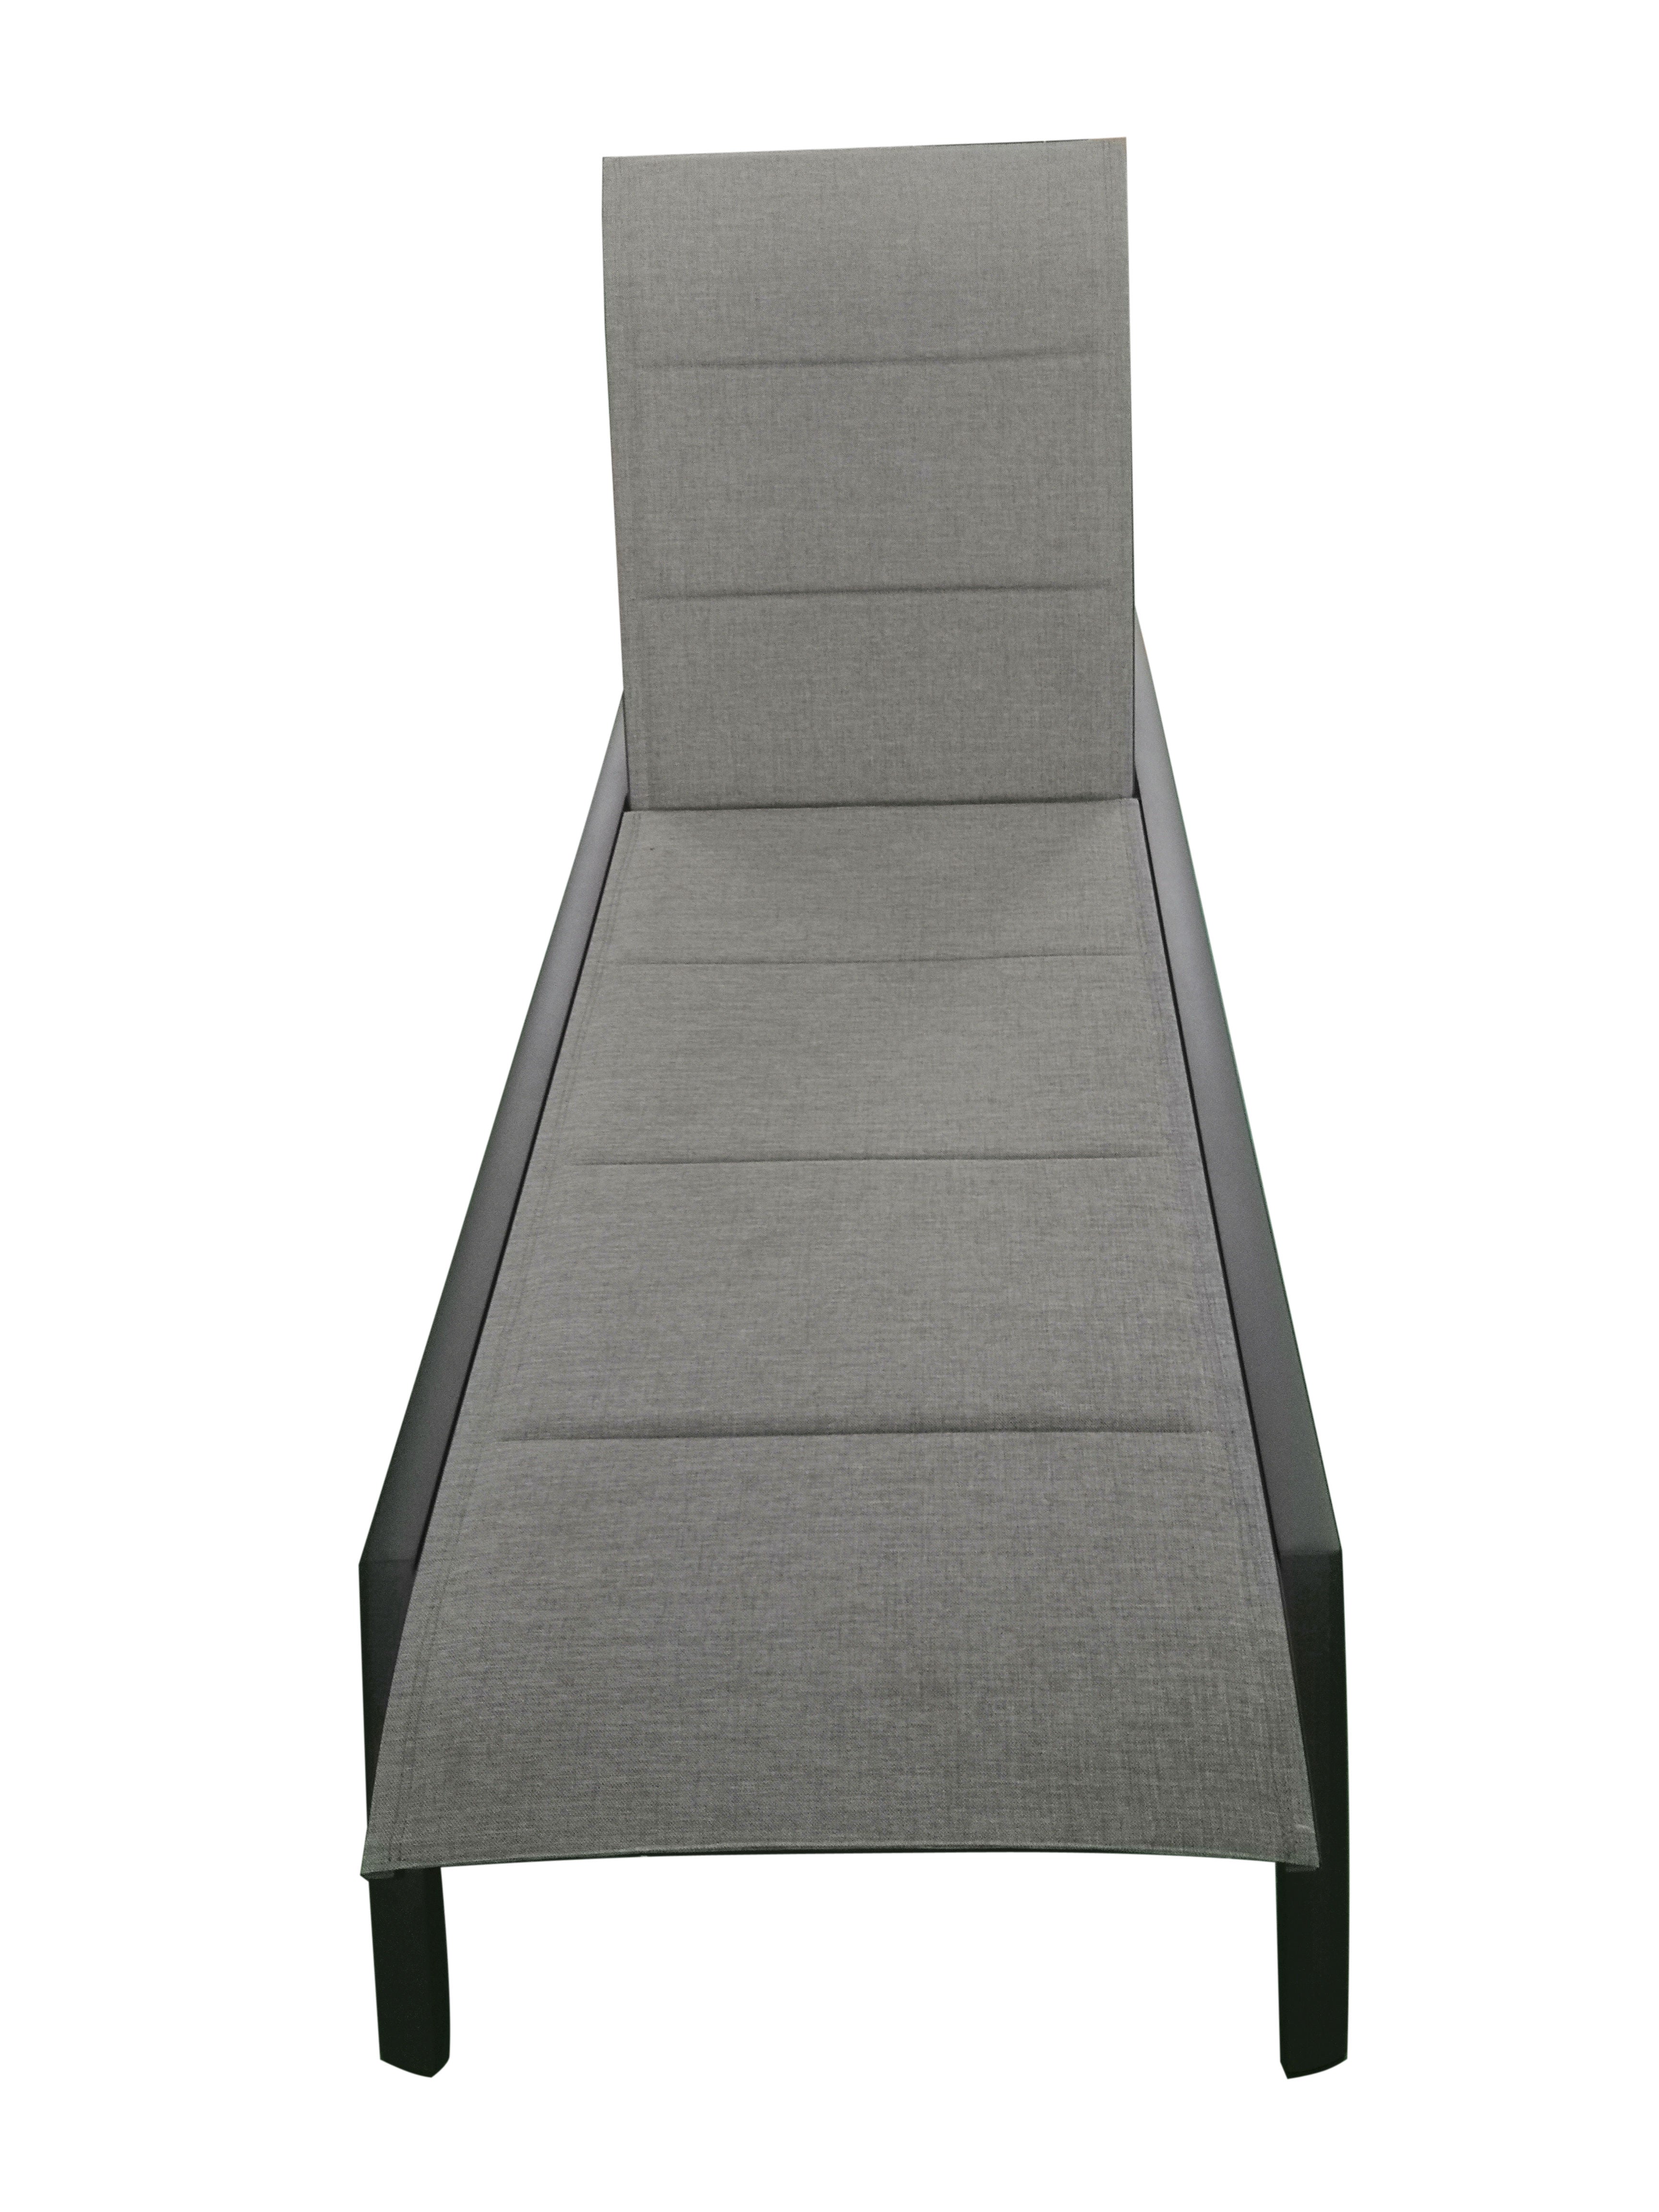 MOSS MOSS-0445GM - Akumal Collection, Charcoal matte aluminum reclining & stackable lounger chair with convenient small back wheels & with grey mix quick dry padded textilene 28 1/2" x 80" x H 14"